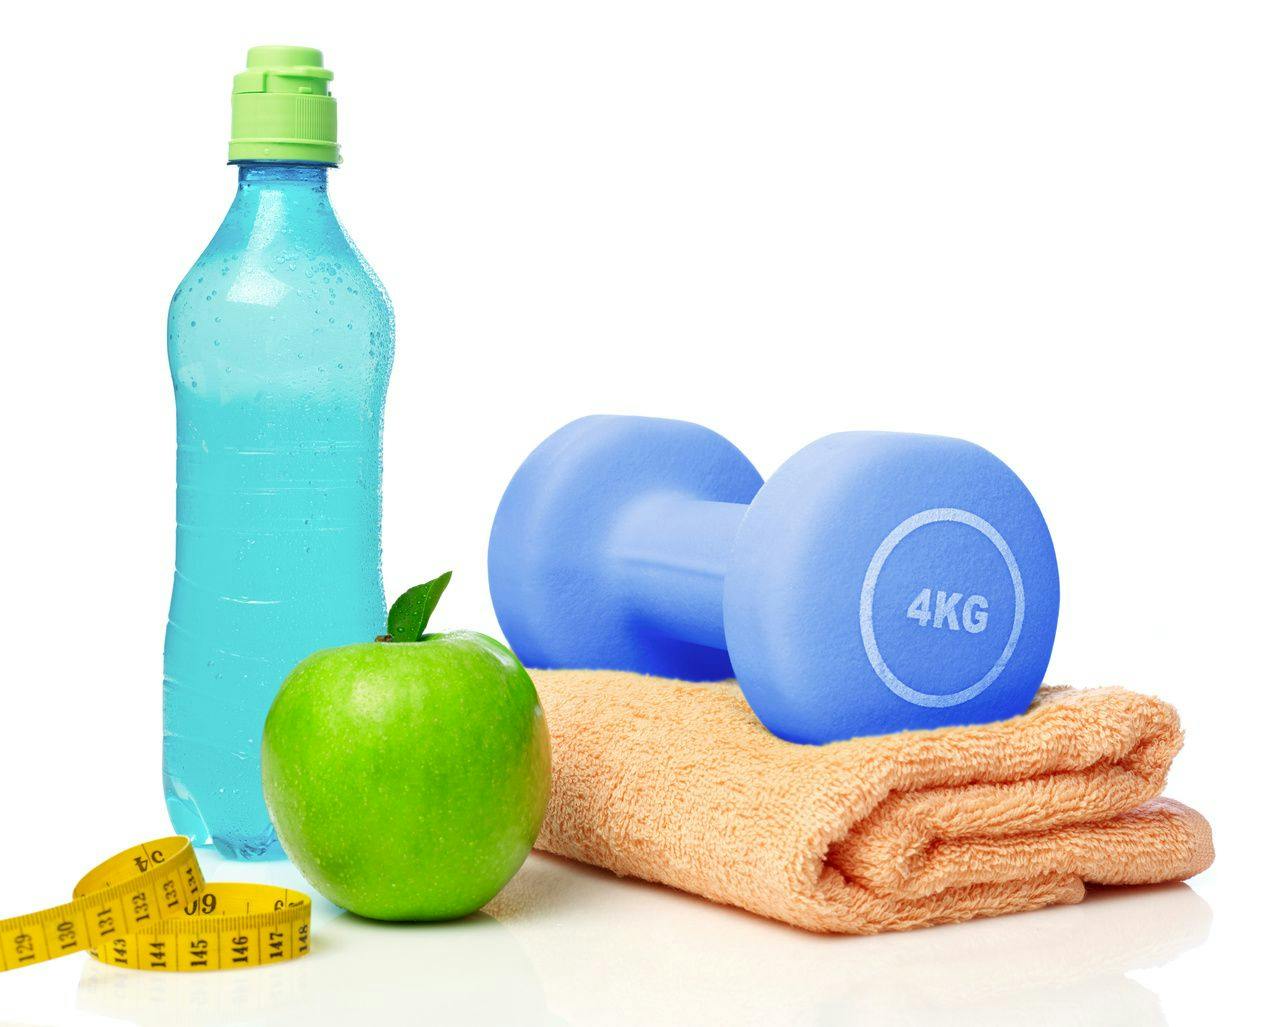 collection of health and fitness items, including water bottle, apple, weight, towel, and measuring tape